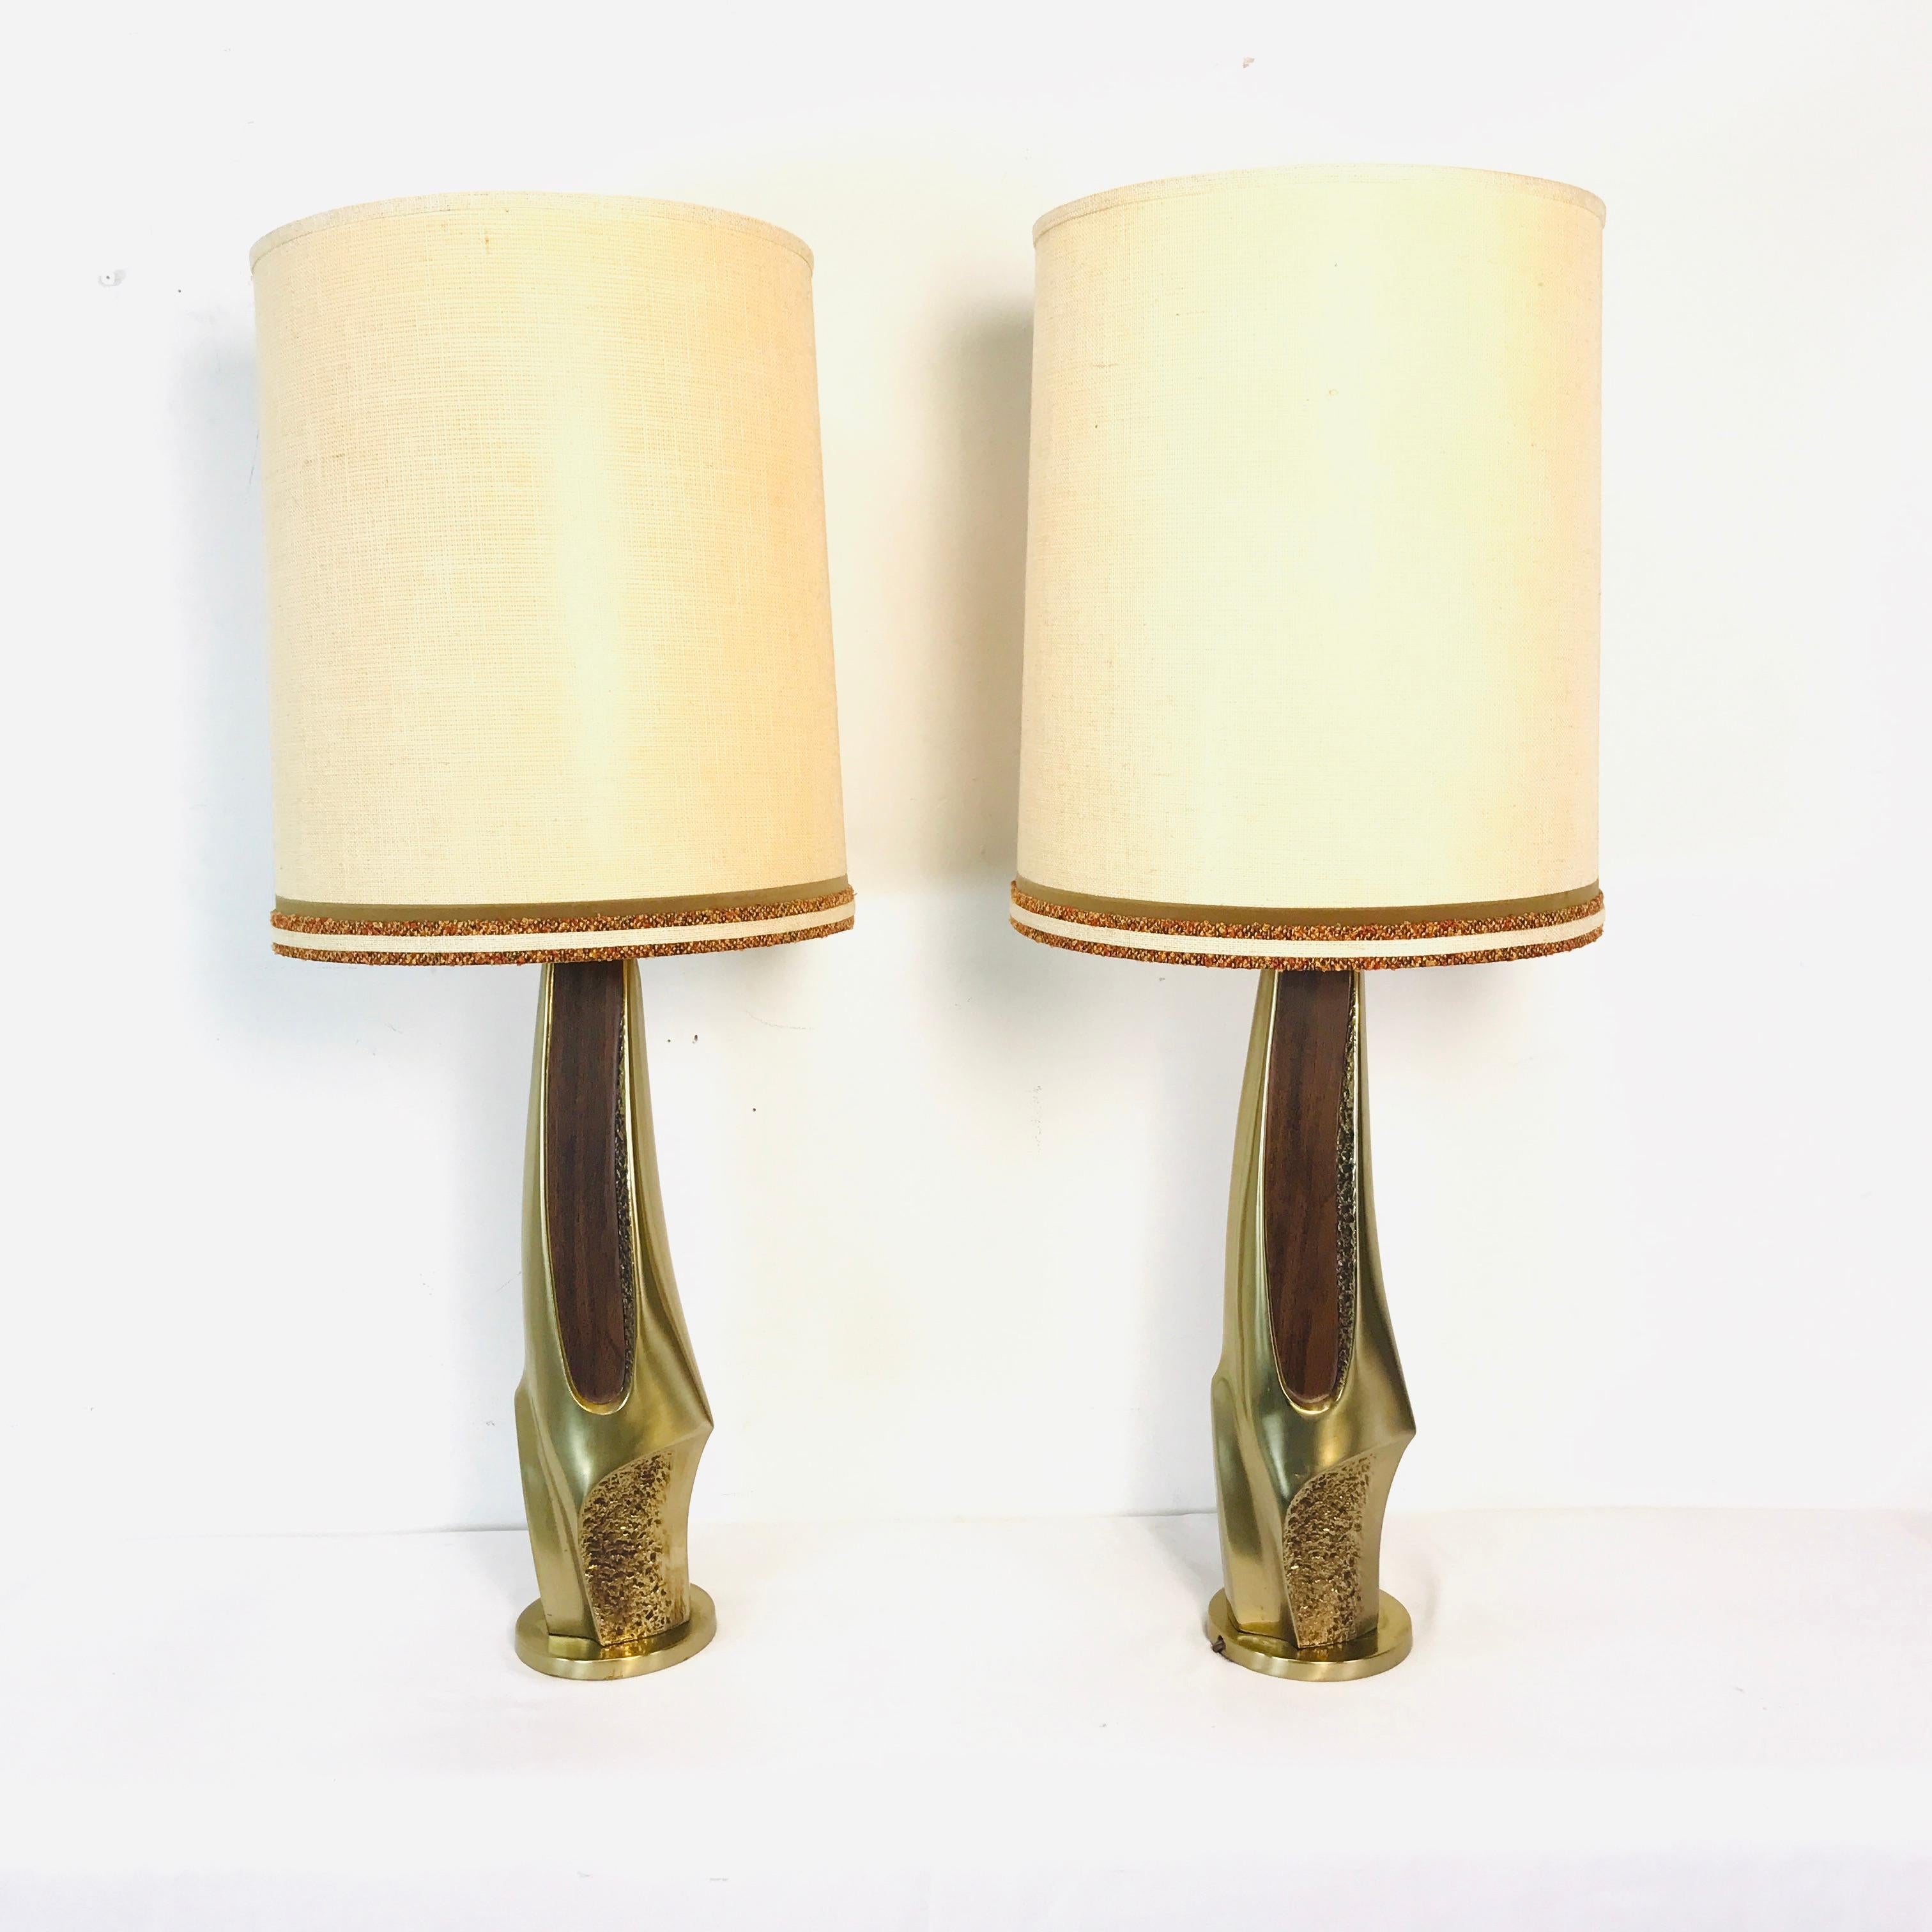 Rare pair of brass and walnut lamps designed by the Laurel Lamp Company. Beautiful organic/abstract form indicative of the 1960s. Original lamp shades and wiring in wood working order. Excellent overall quality and condition.